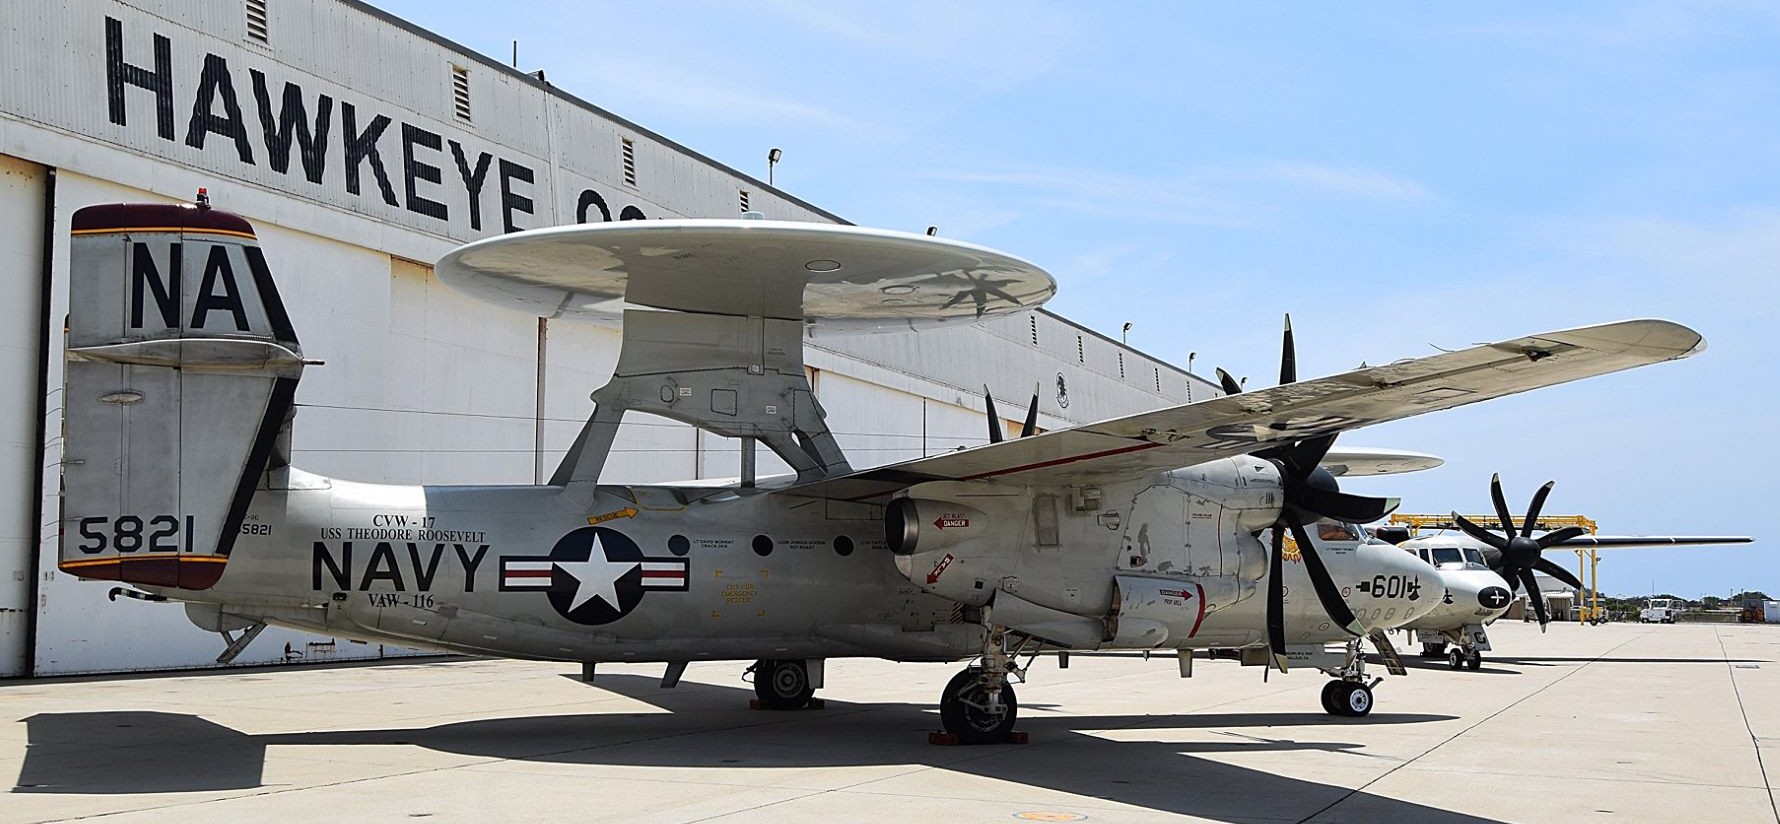 vaw-116 sun kings airborne command control squadron carrier early warning cvw-17 naval base ventura county point mugu 78